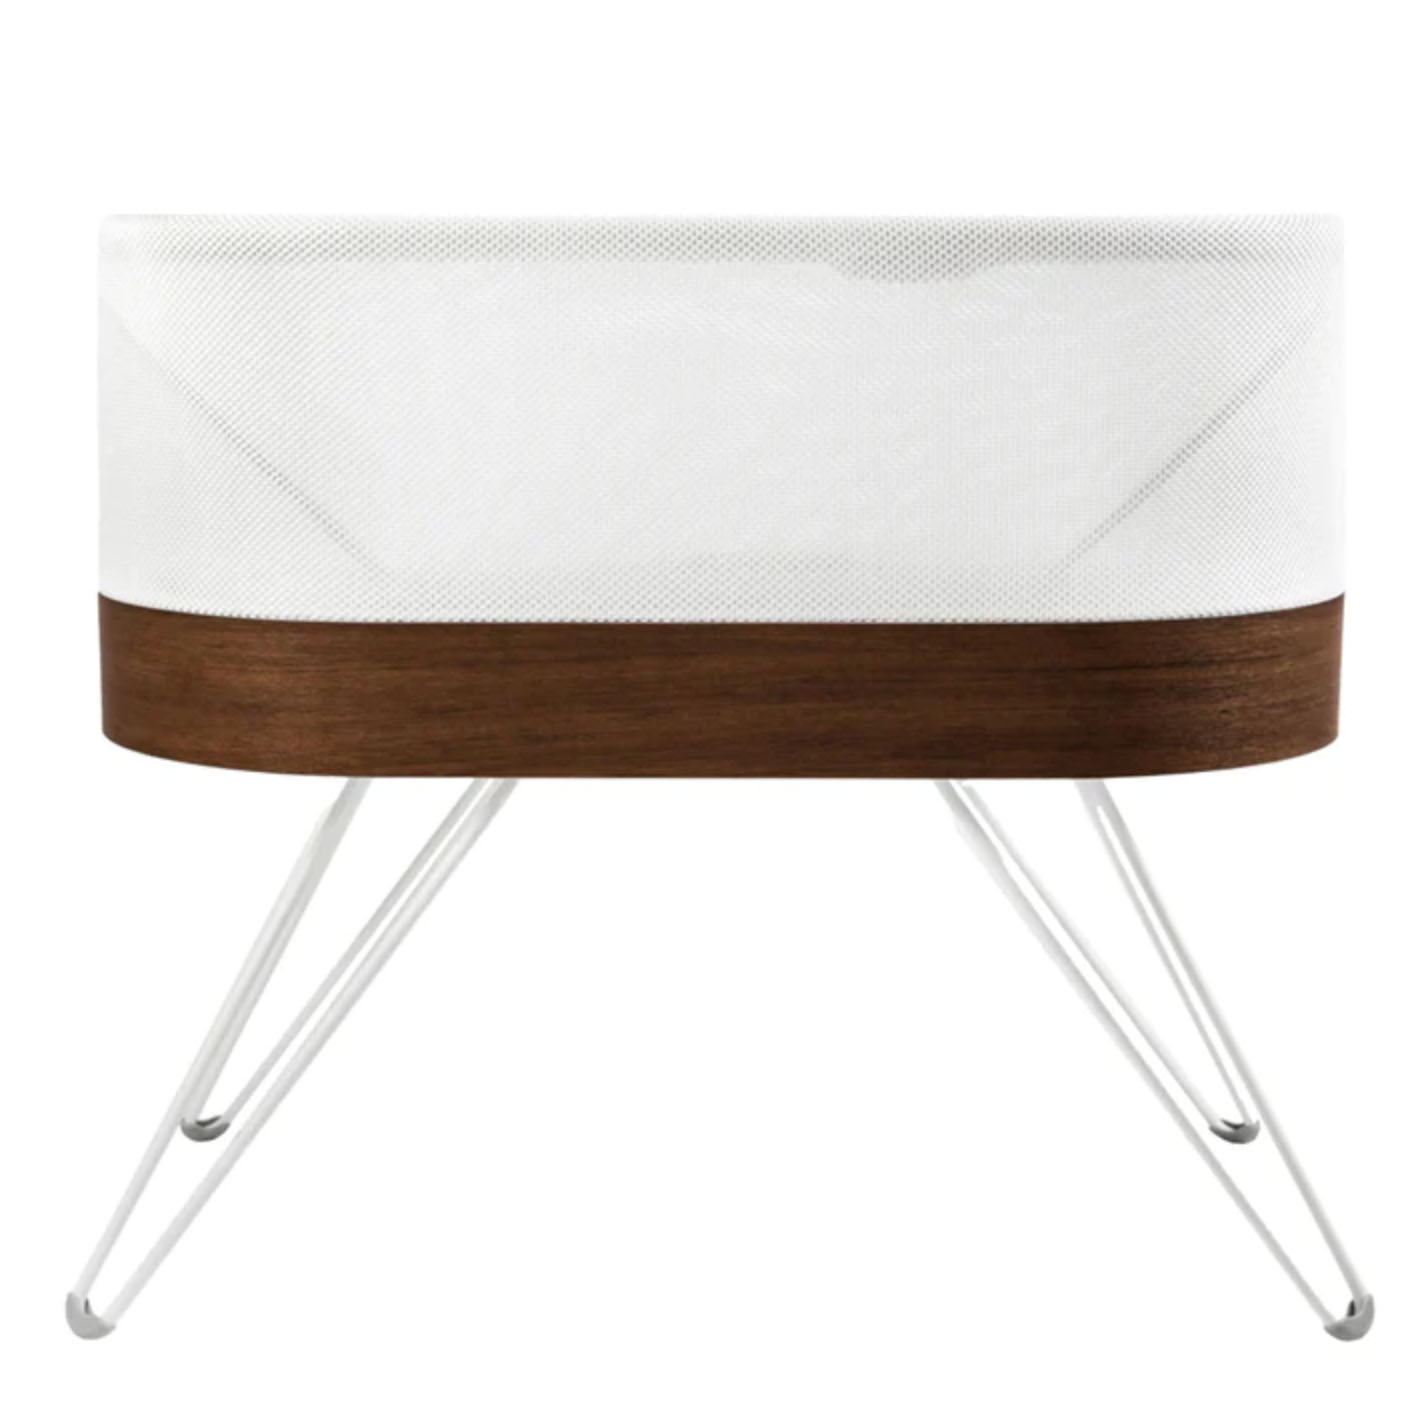 White and wooden bassinet